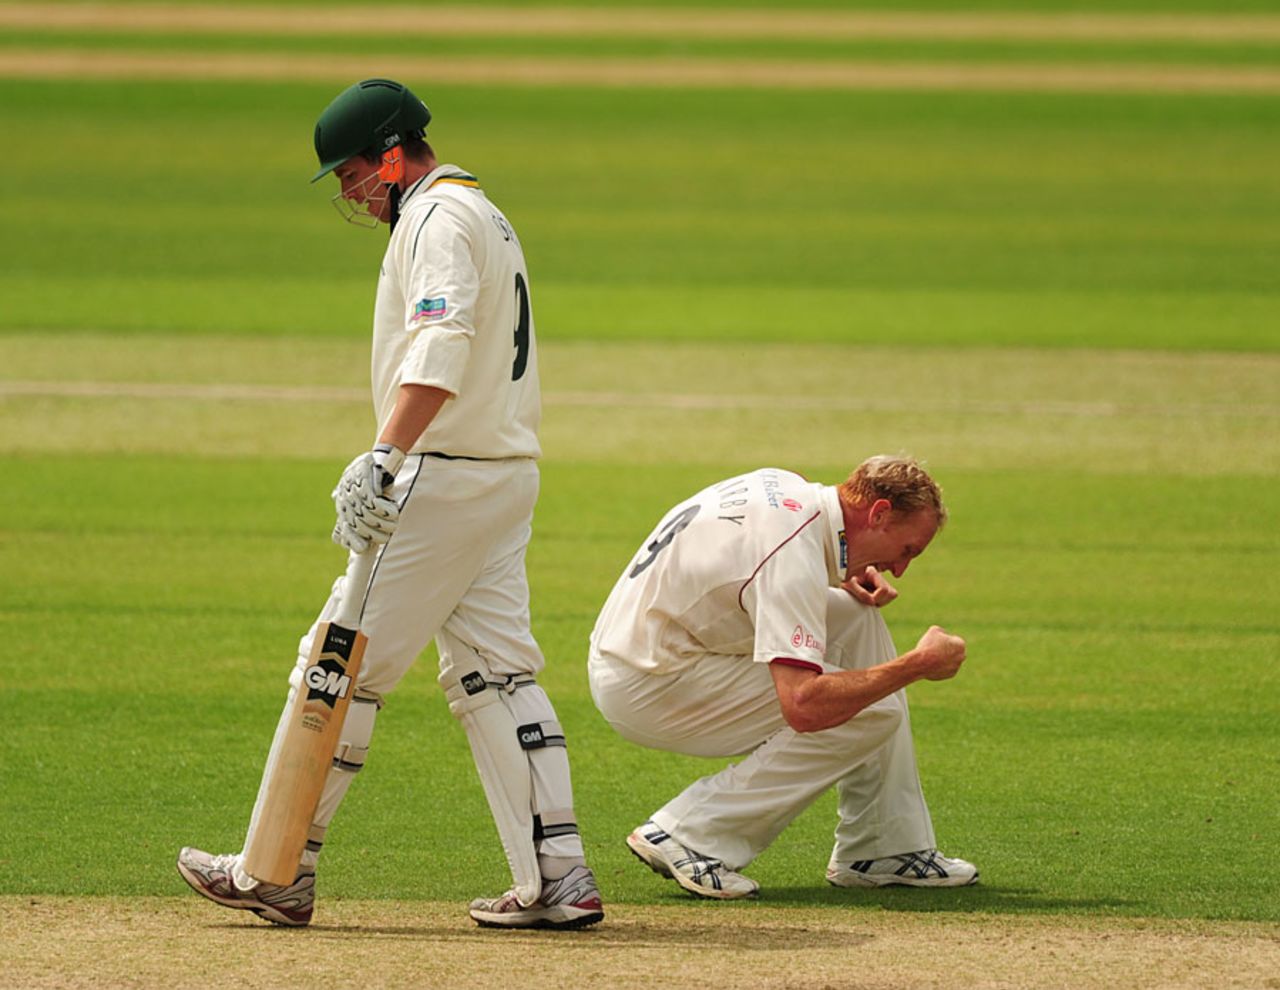 Steve Kirby celebrates the wicket of Riki Wessels, Nottinghamshire v Somerset, County Championship, Division One, Trent Bridge, July 12, 2011